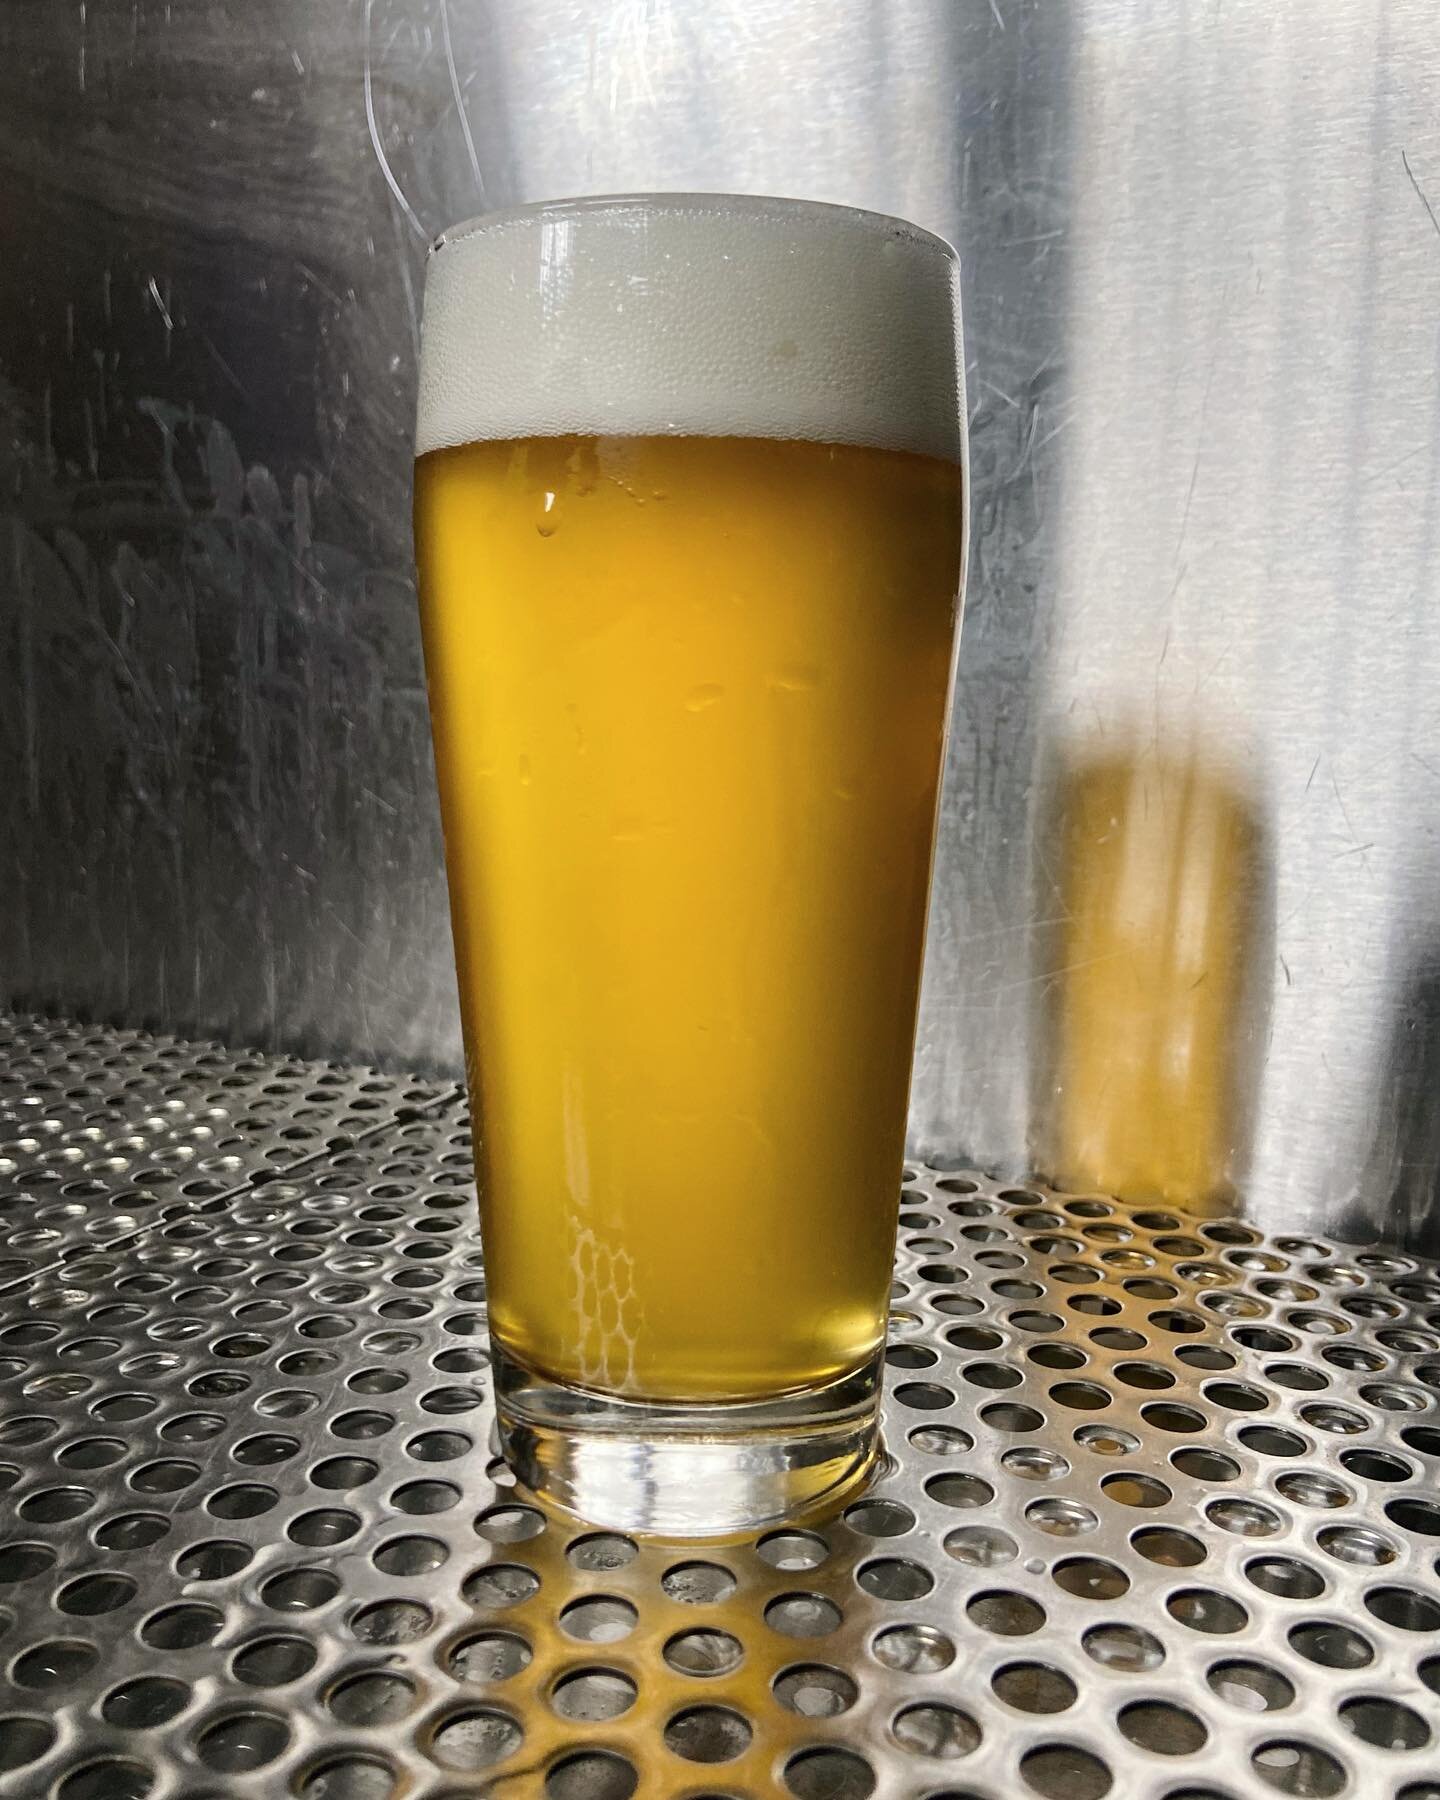 💕We love lagers💕

Tonight 2/14, 4pm

We have 4 lagers on the board tonight, and we&rsquo;re excited to debut Tropics Pils. With @berkeley_yeast we brewed our flagship Pilsner but subbed out our standard lager yeast for their thiolized Chill Tropics